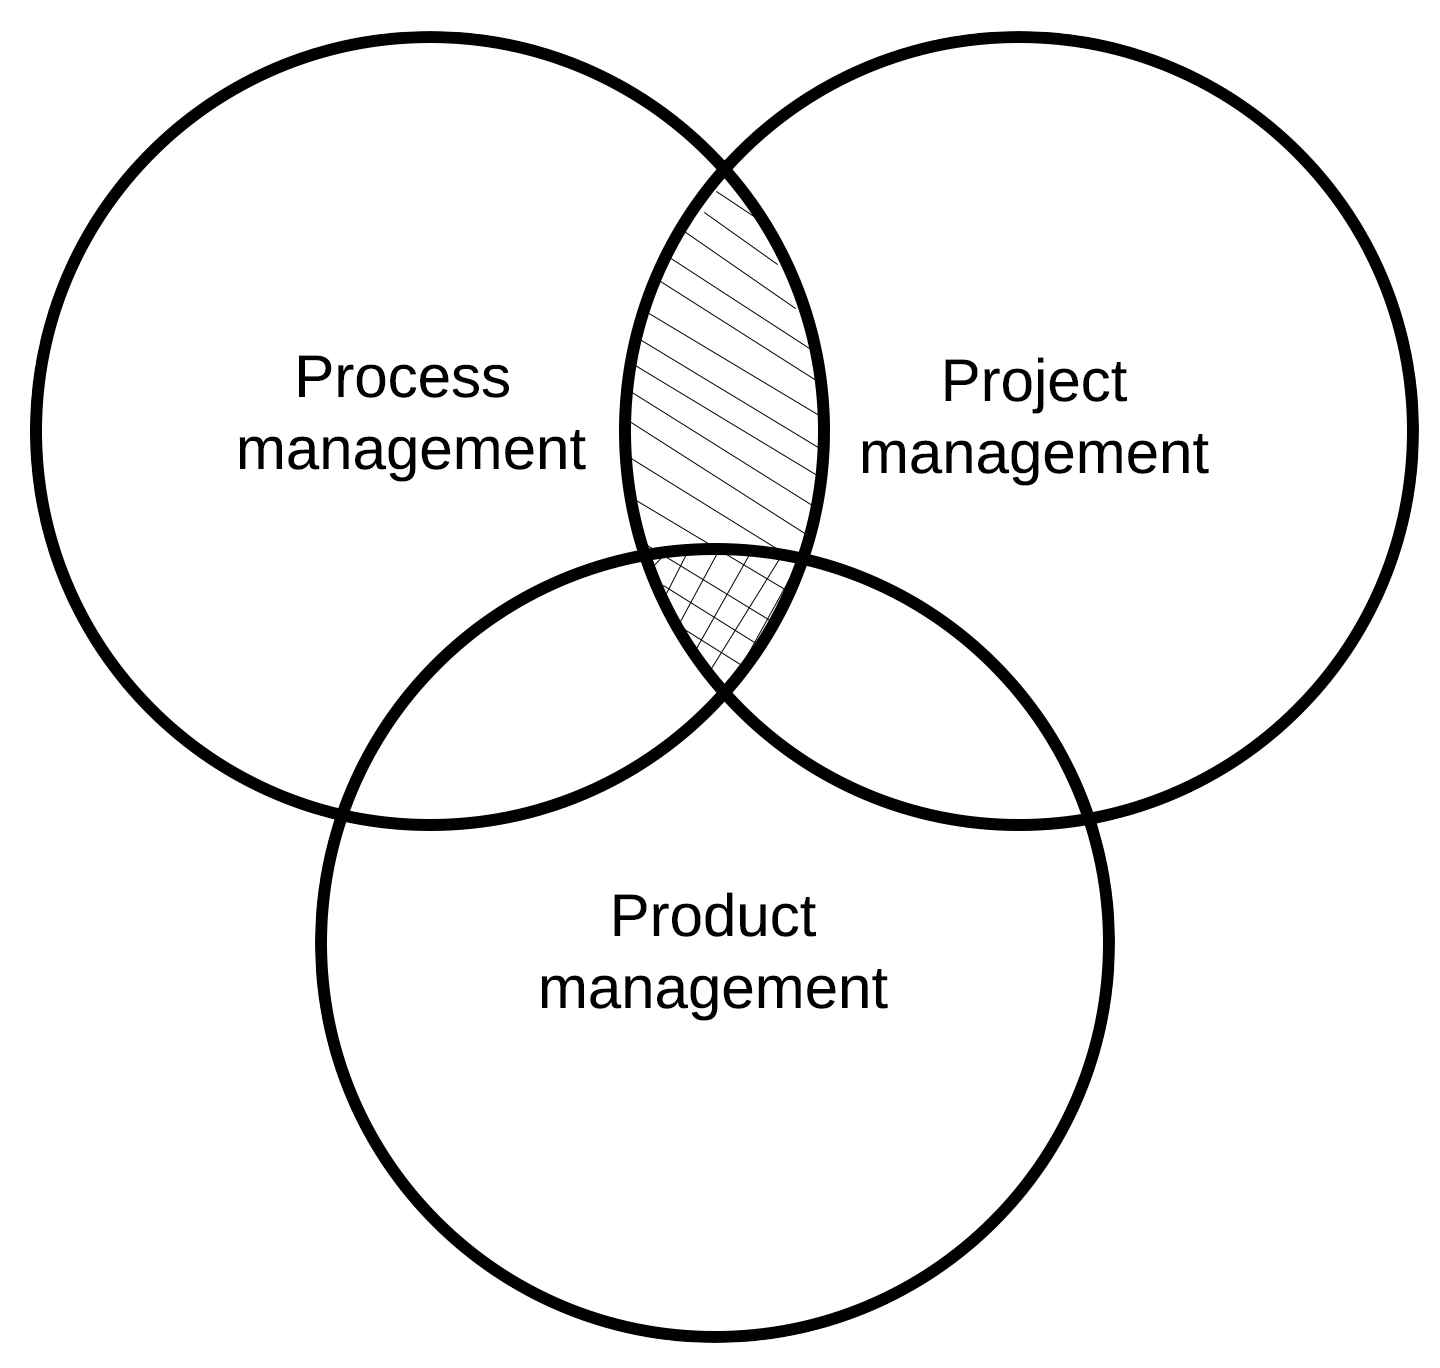 Venn diagram of overlap of process, project, and product management.